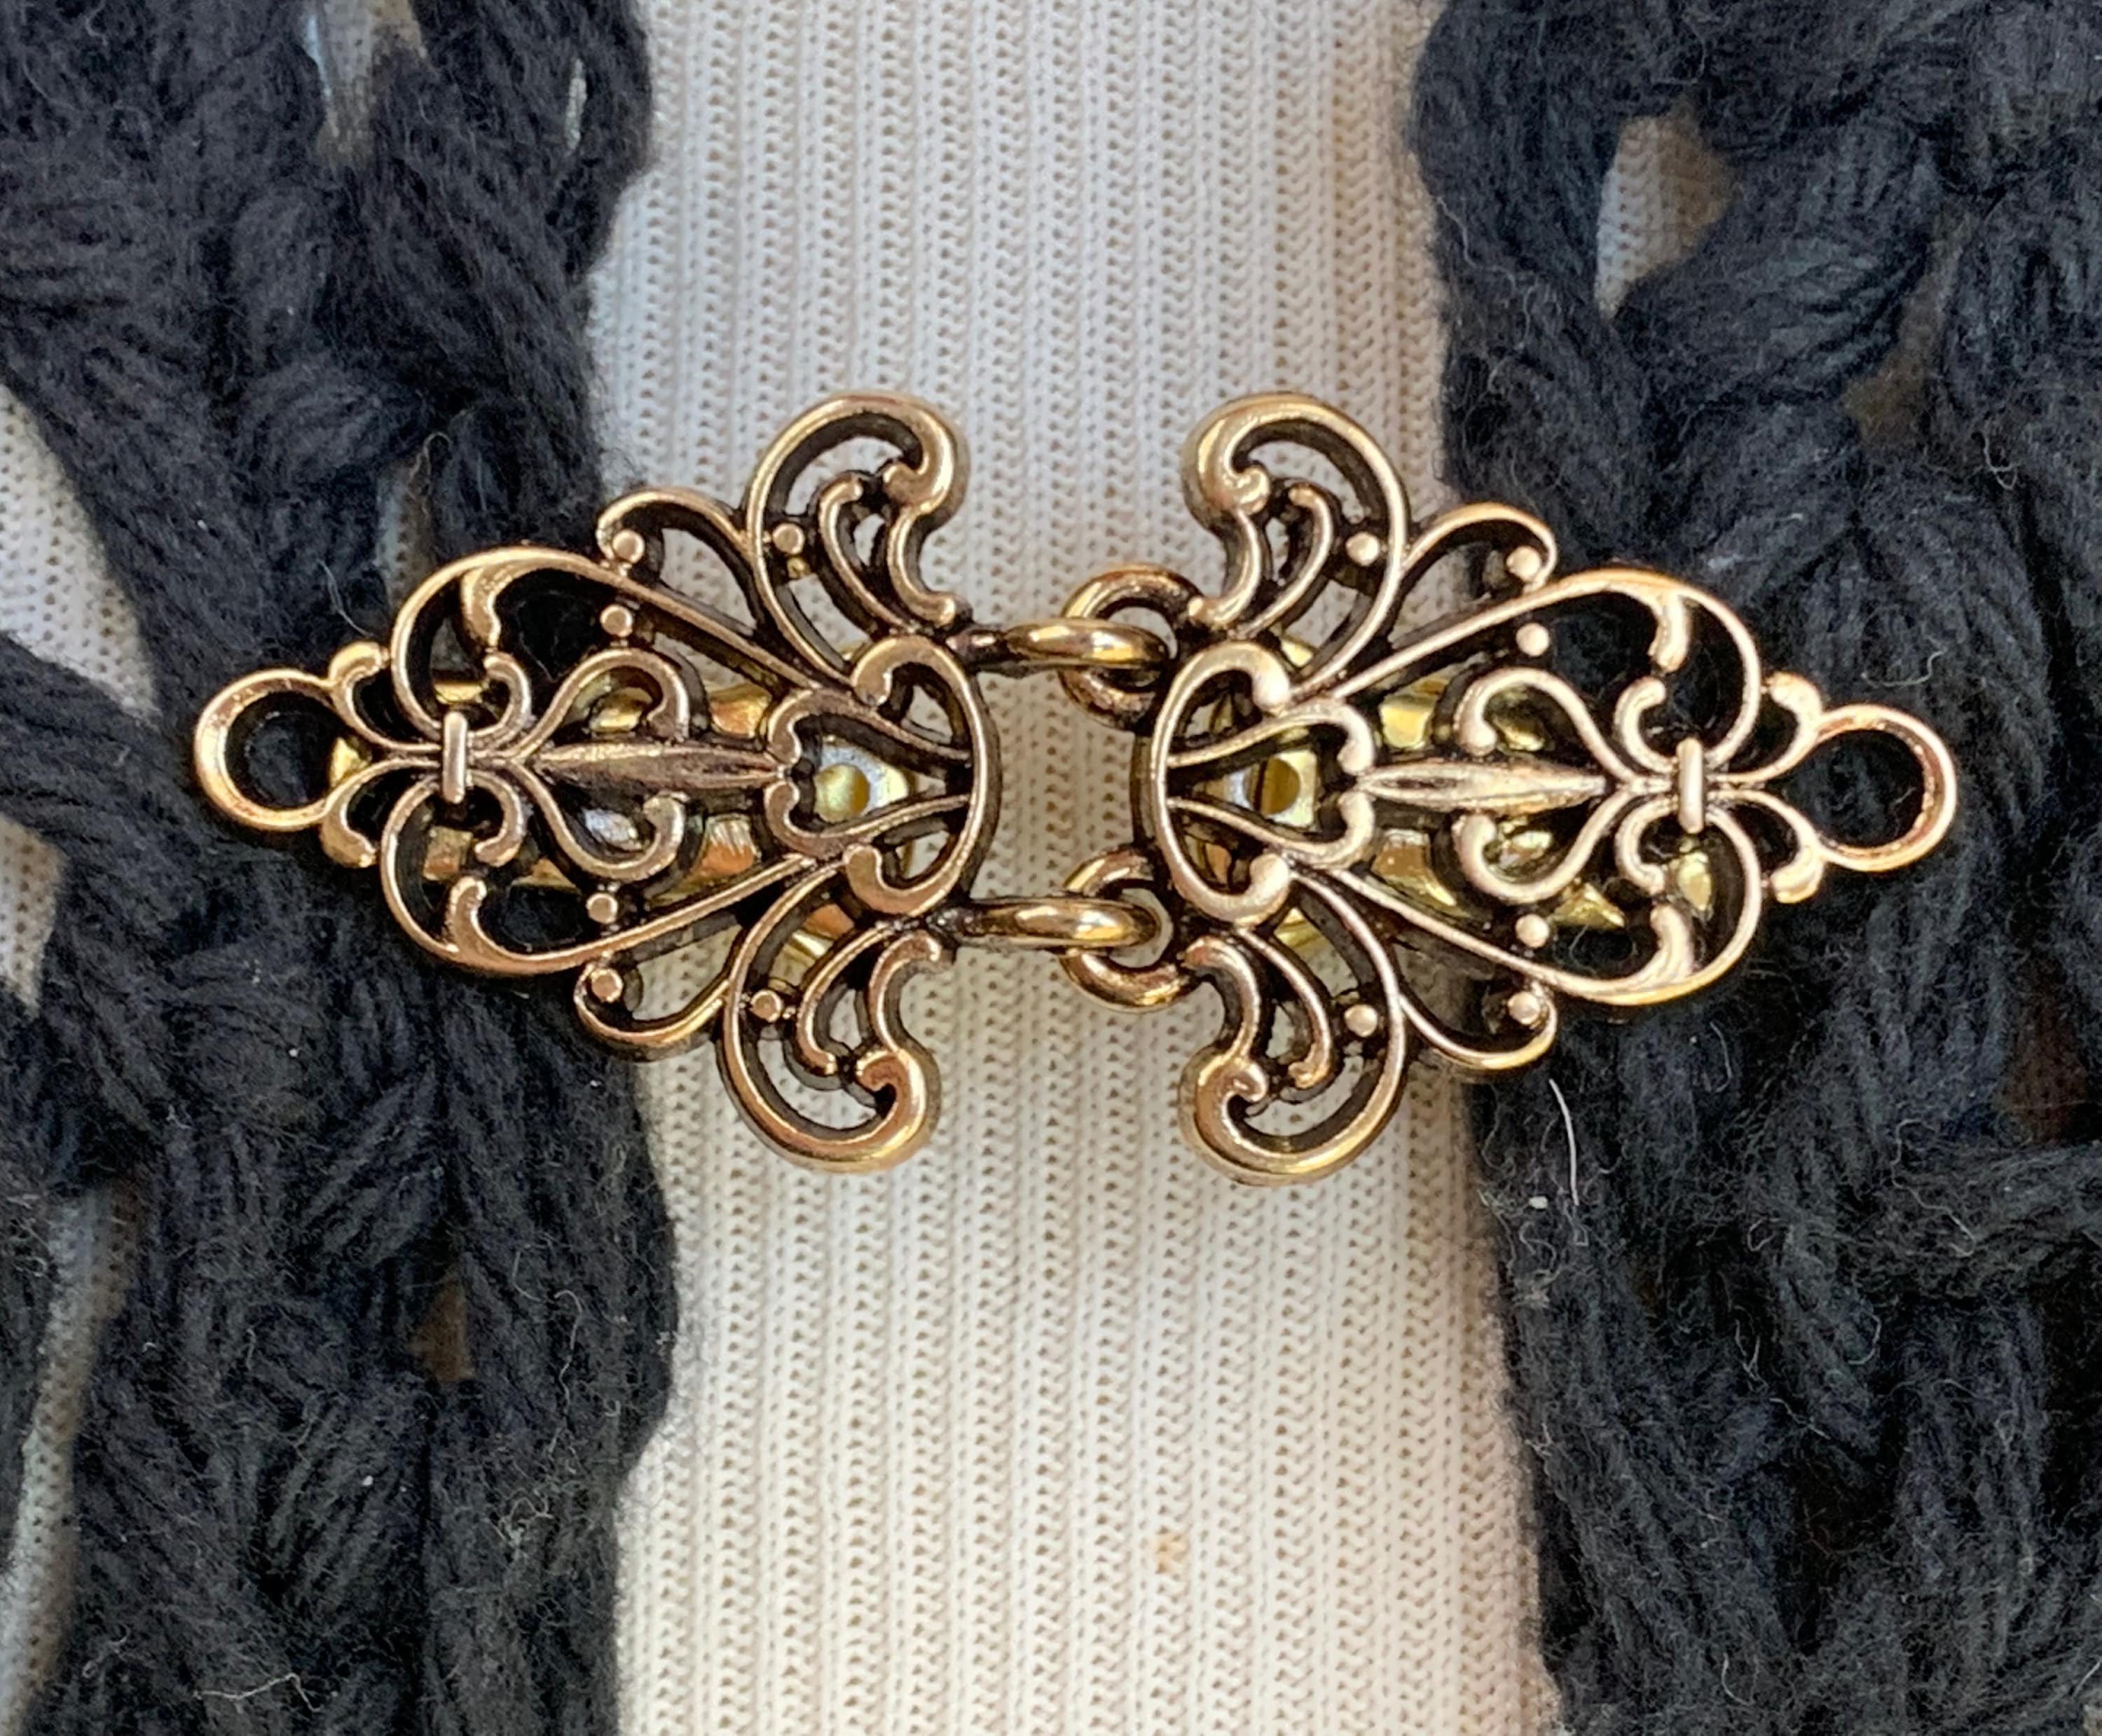 VINTAGE SWEATER CLIP WITH BUTTERFLY DESIGN. STAINLESS STEEL.